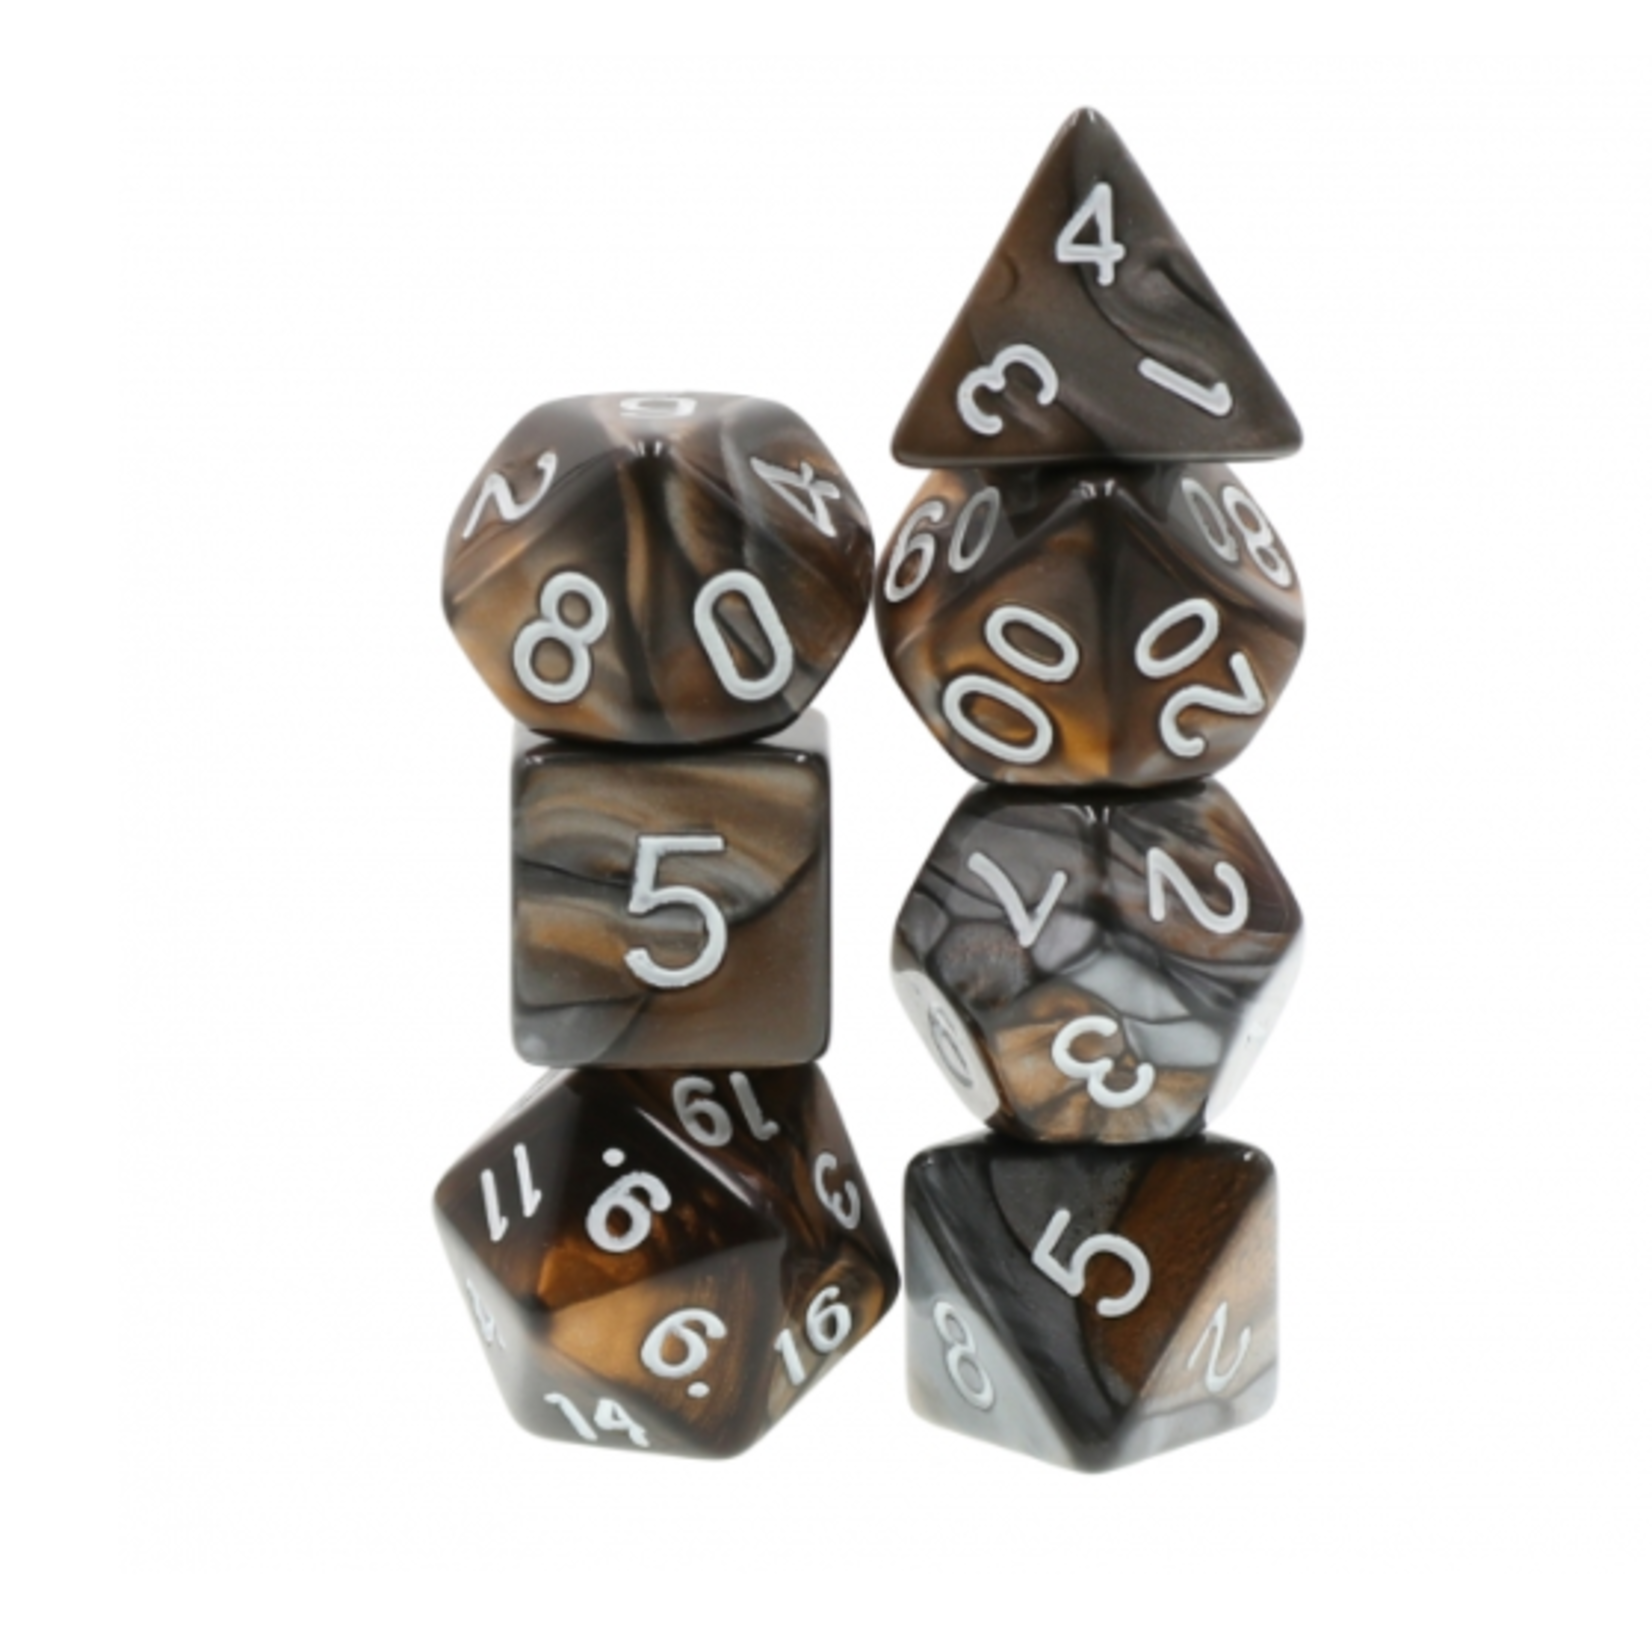 Goblin Dice Gold and Silver Dice Set